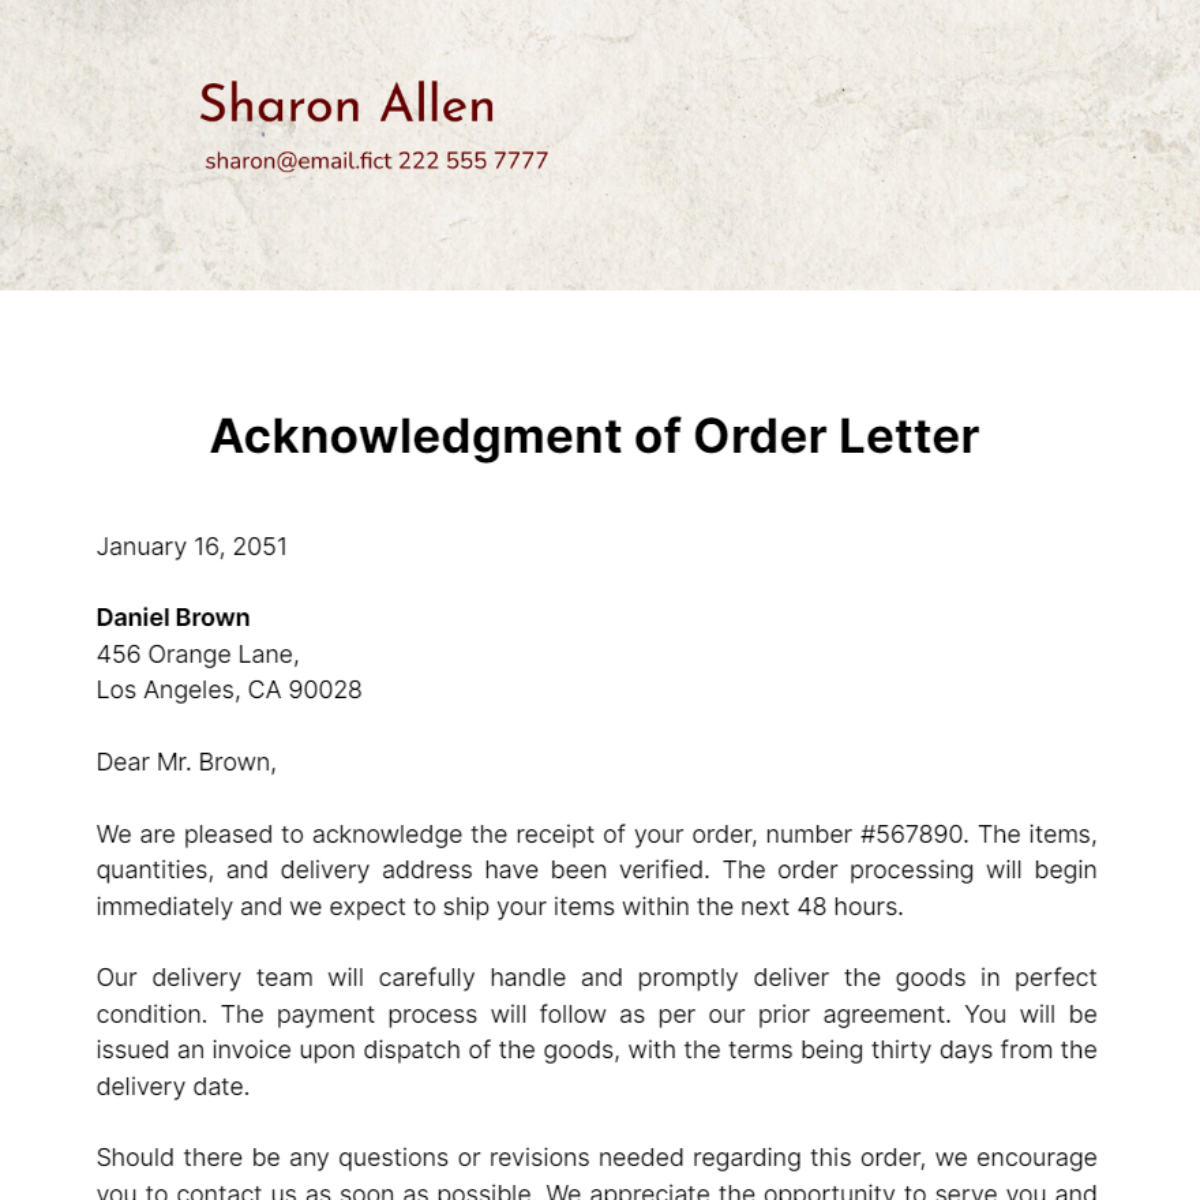 Acknowledgement of Order Letter Template